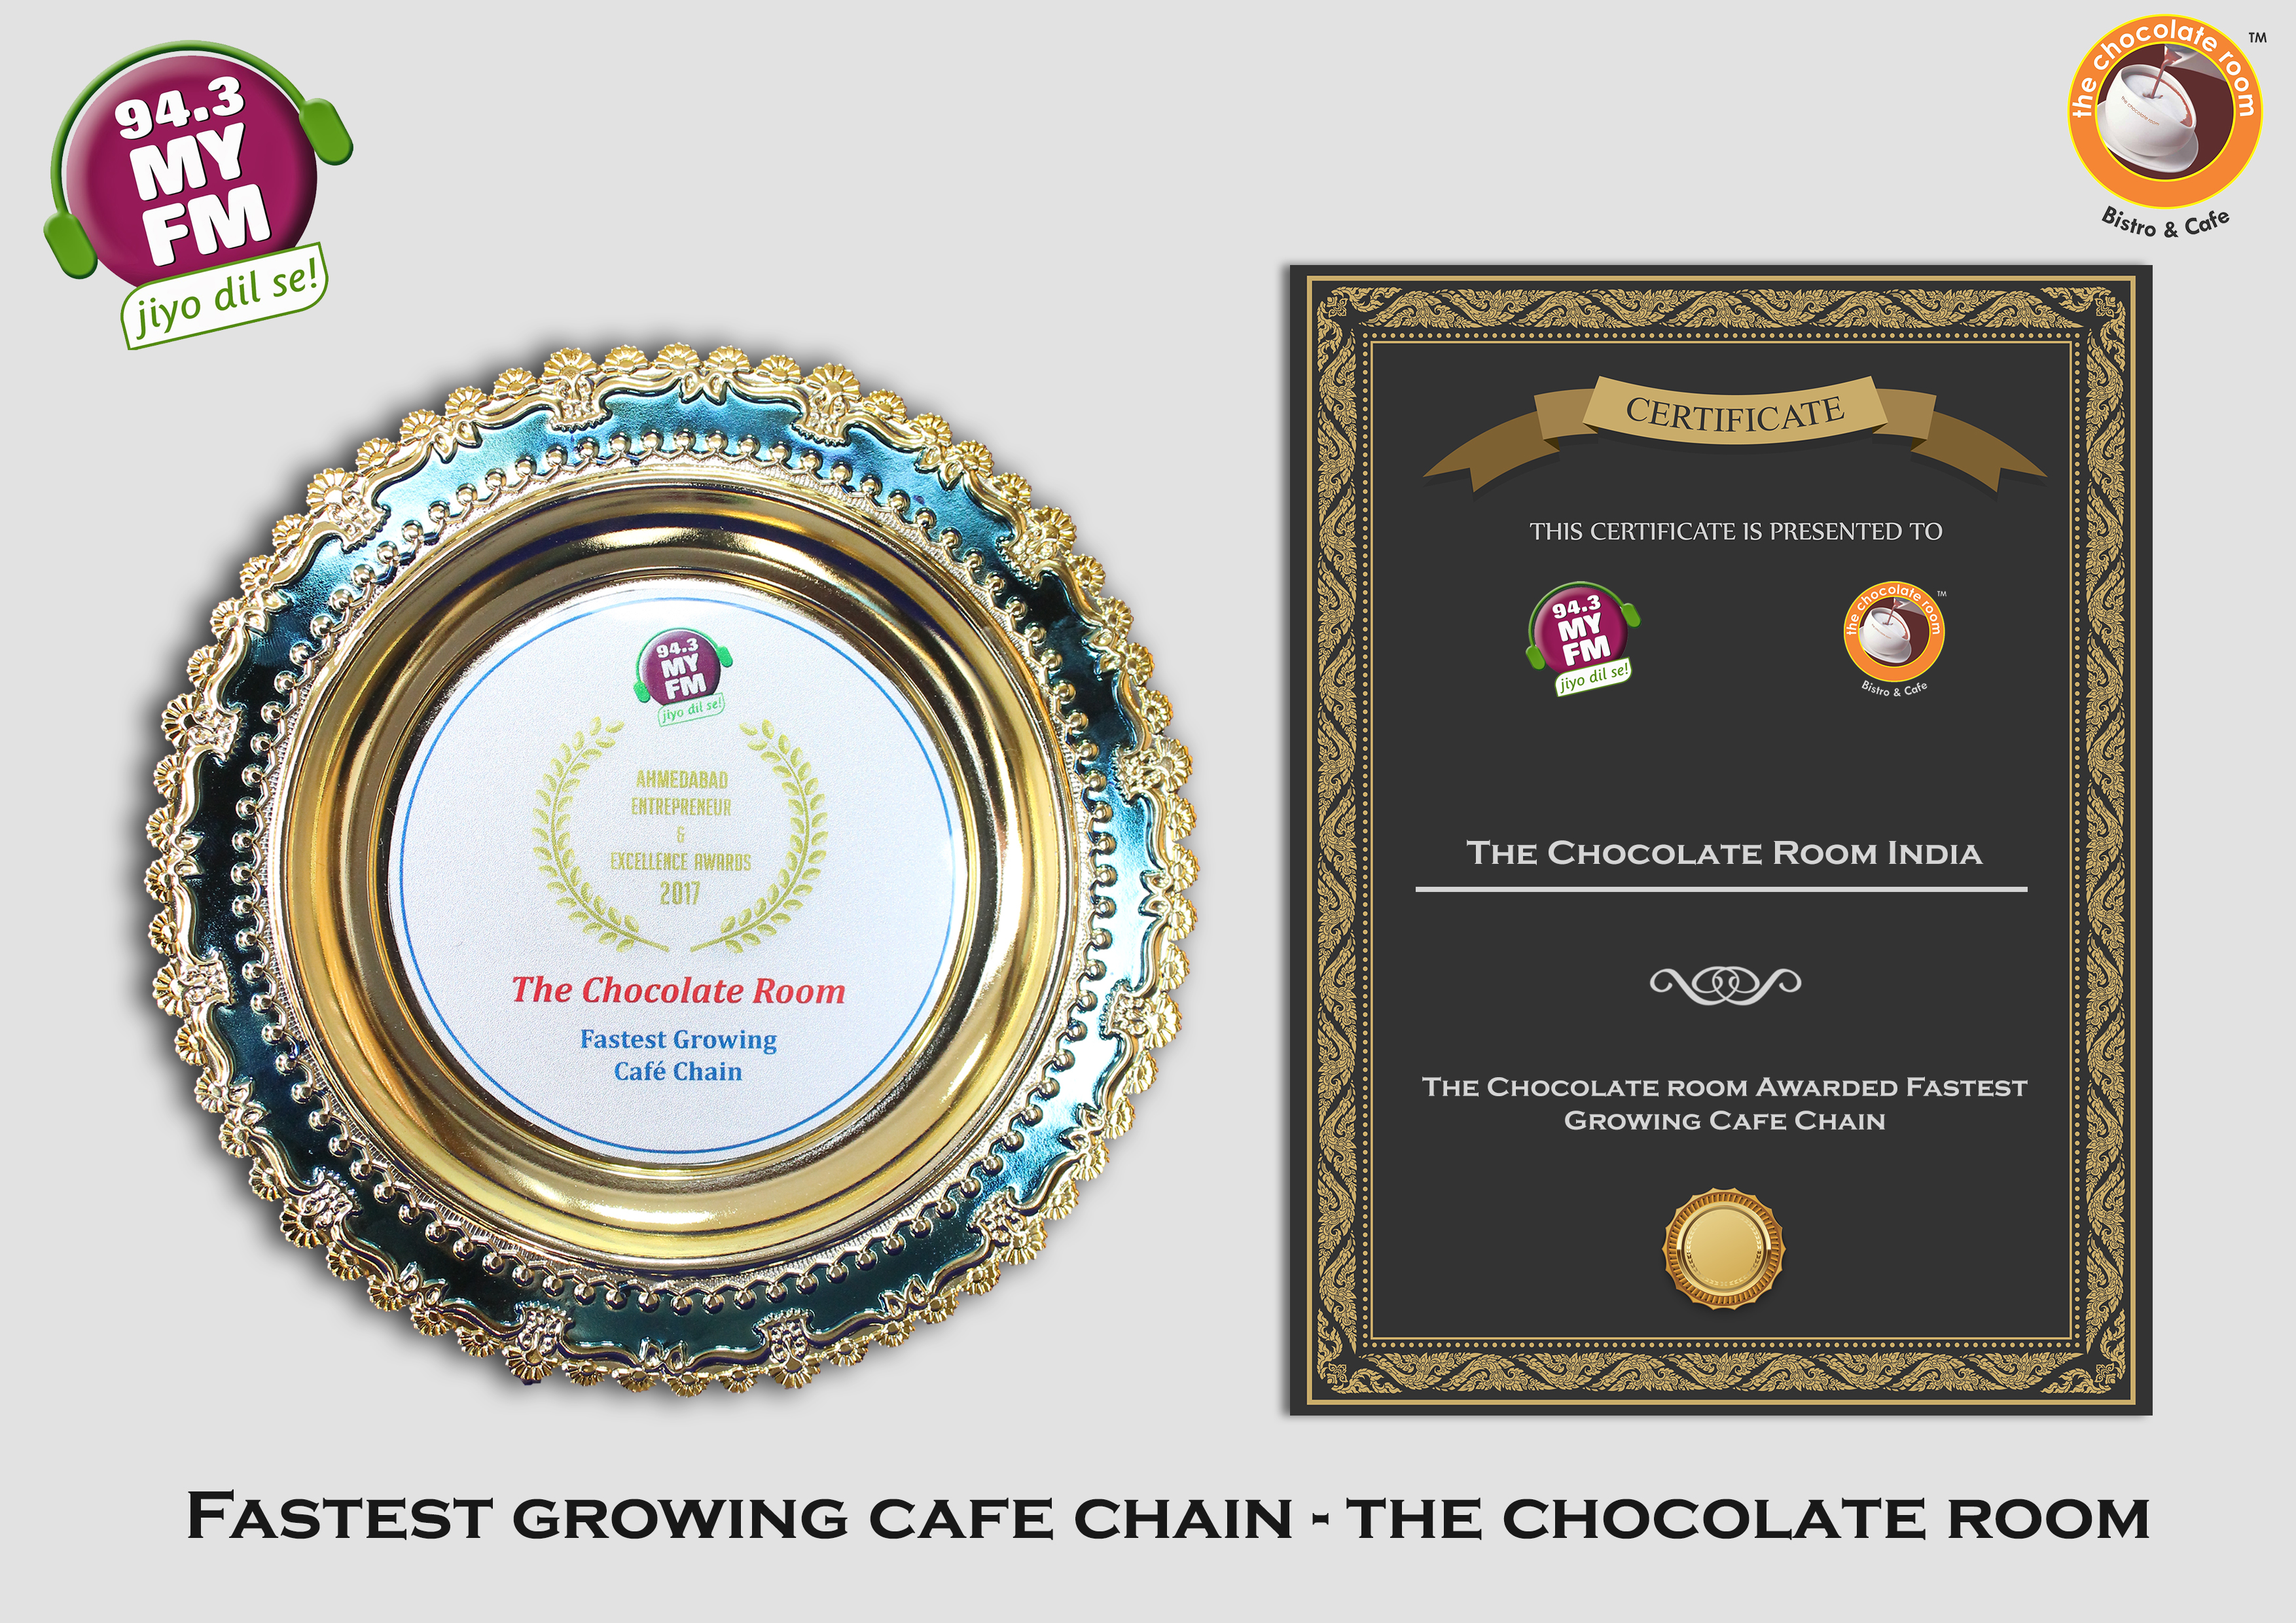 FASTEST GROWING CAFE CHAIN 2017